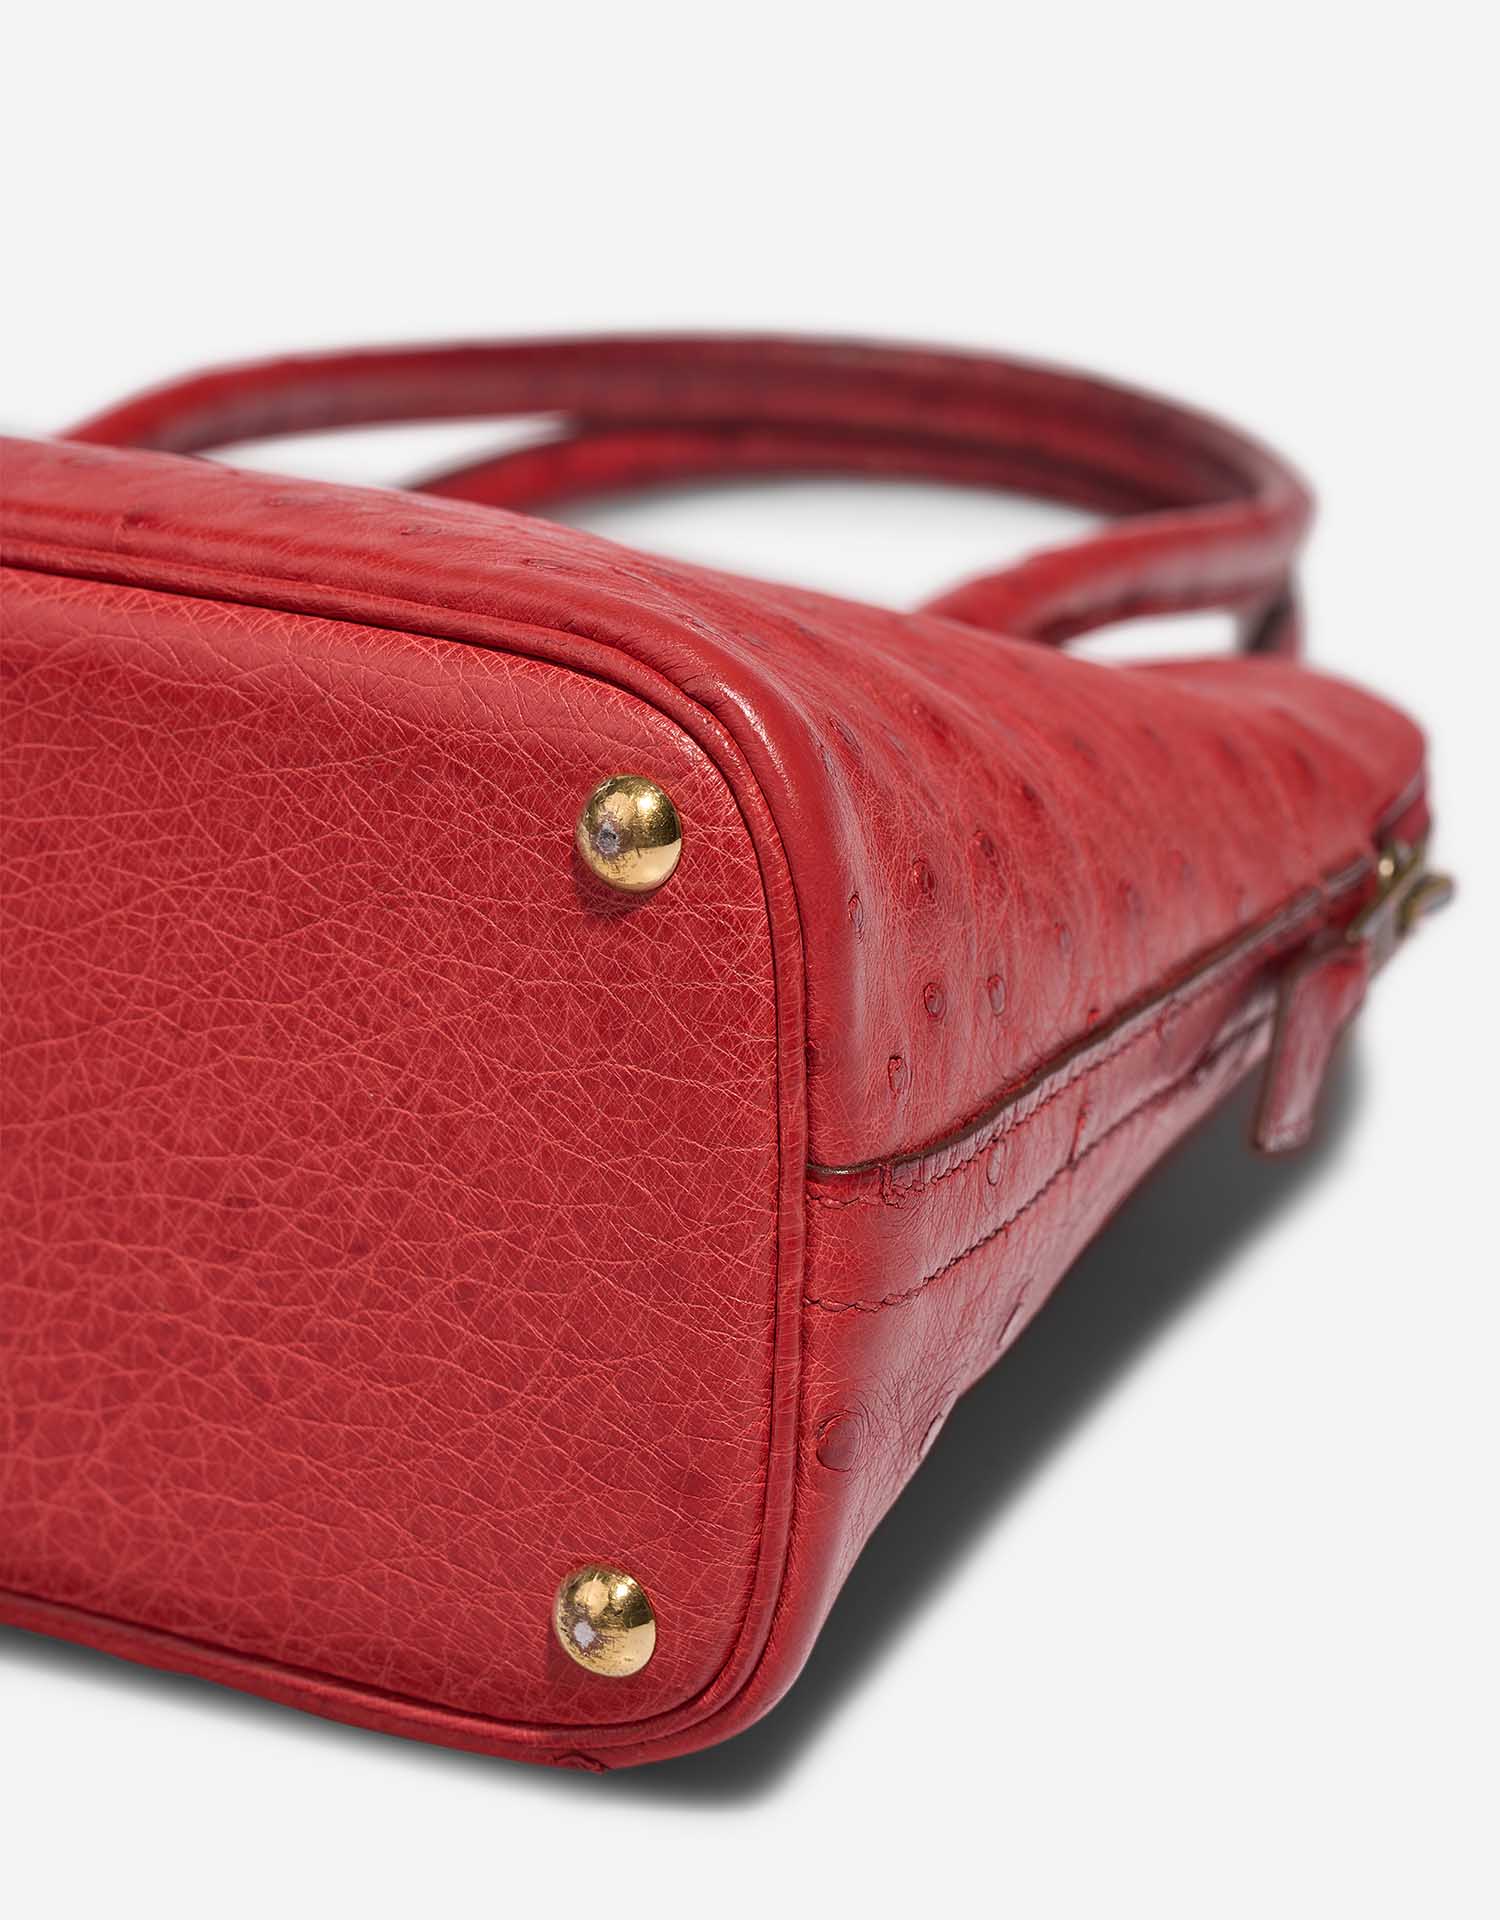 Hermès Bolide 27 RougeVif signs of wear| Sell your designer bag on Saclab.com